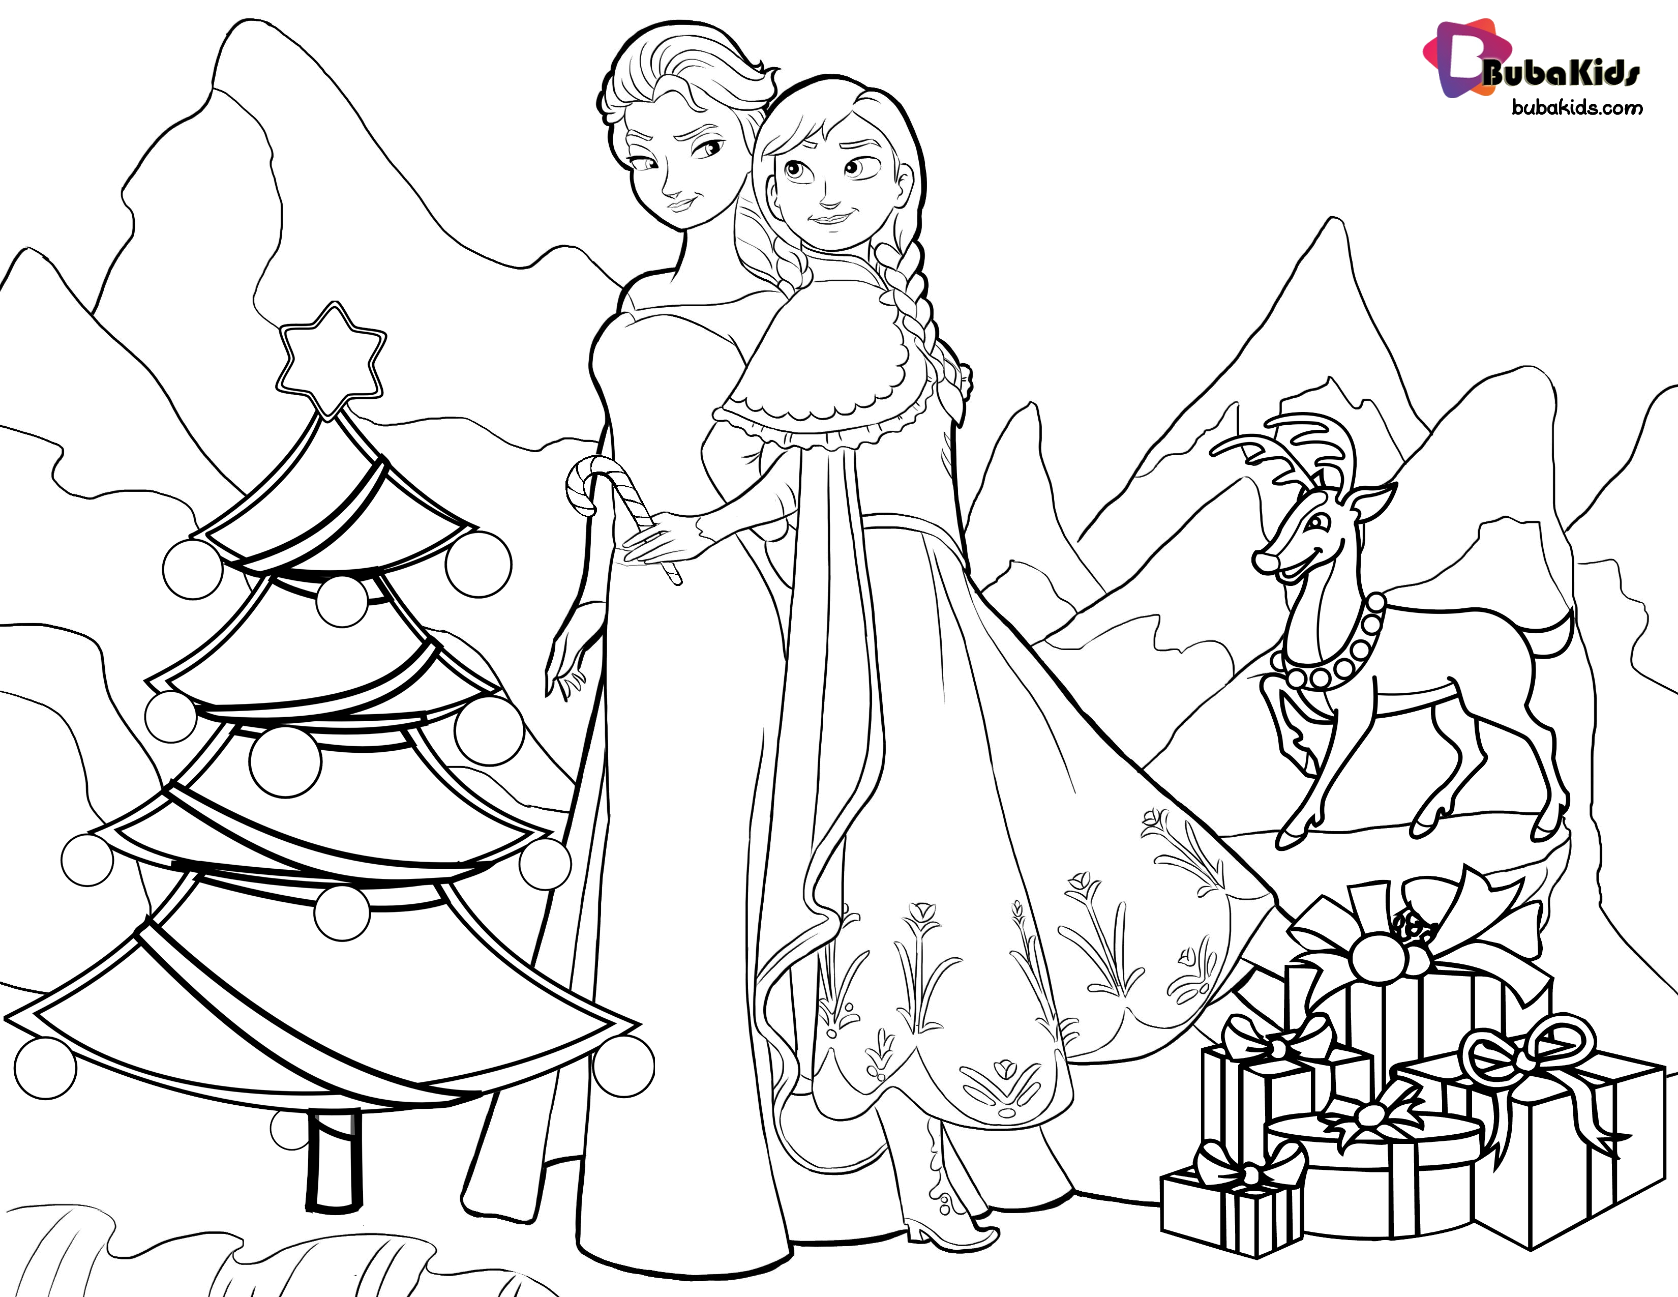 Frozen Queen Elsa and Princess Anna Christmas coloring page. Wallpaper